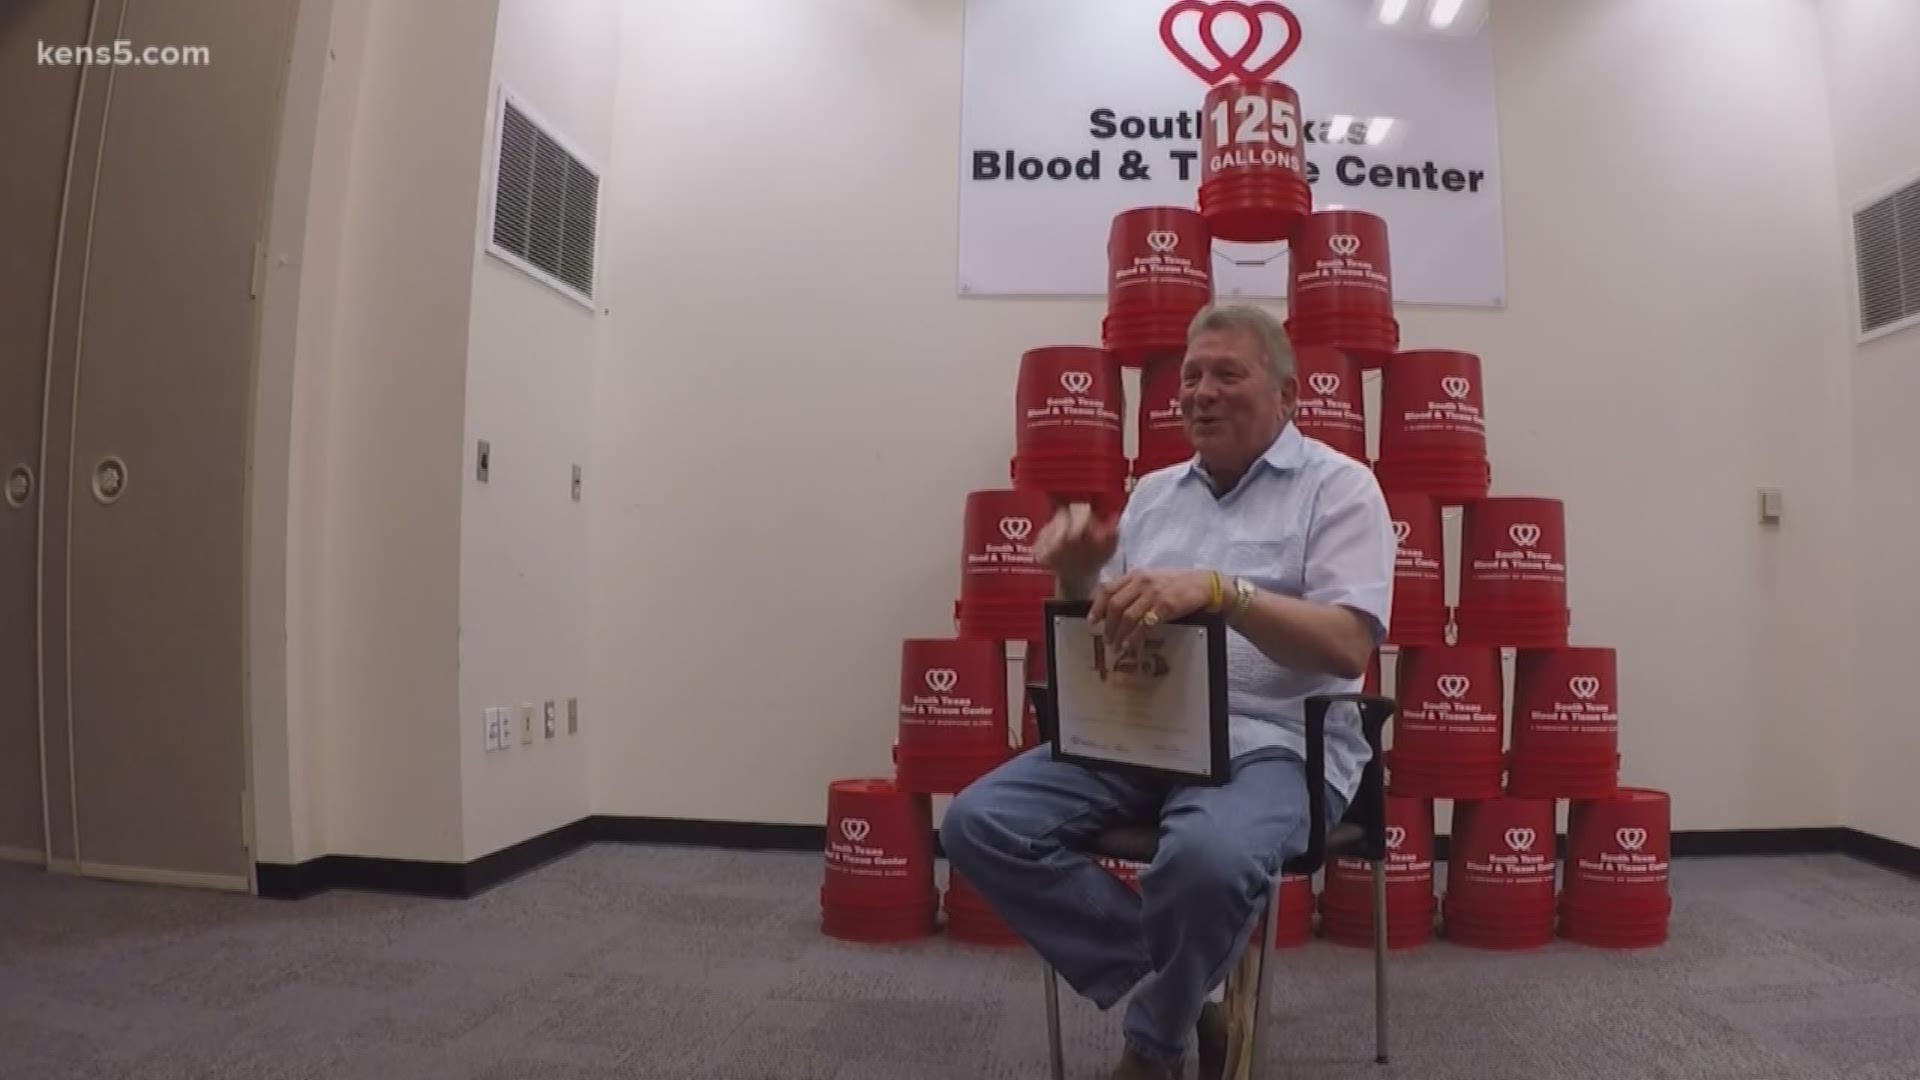 For the last 25 years, this Texas man regularly donated blood. At 75 years of age, he celebrated a major milestone in his charitable habit.